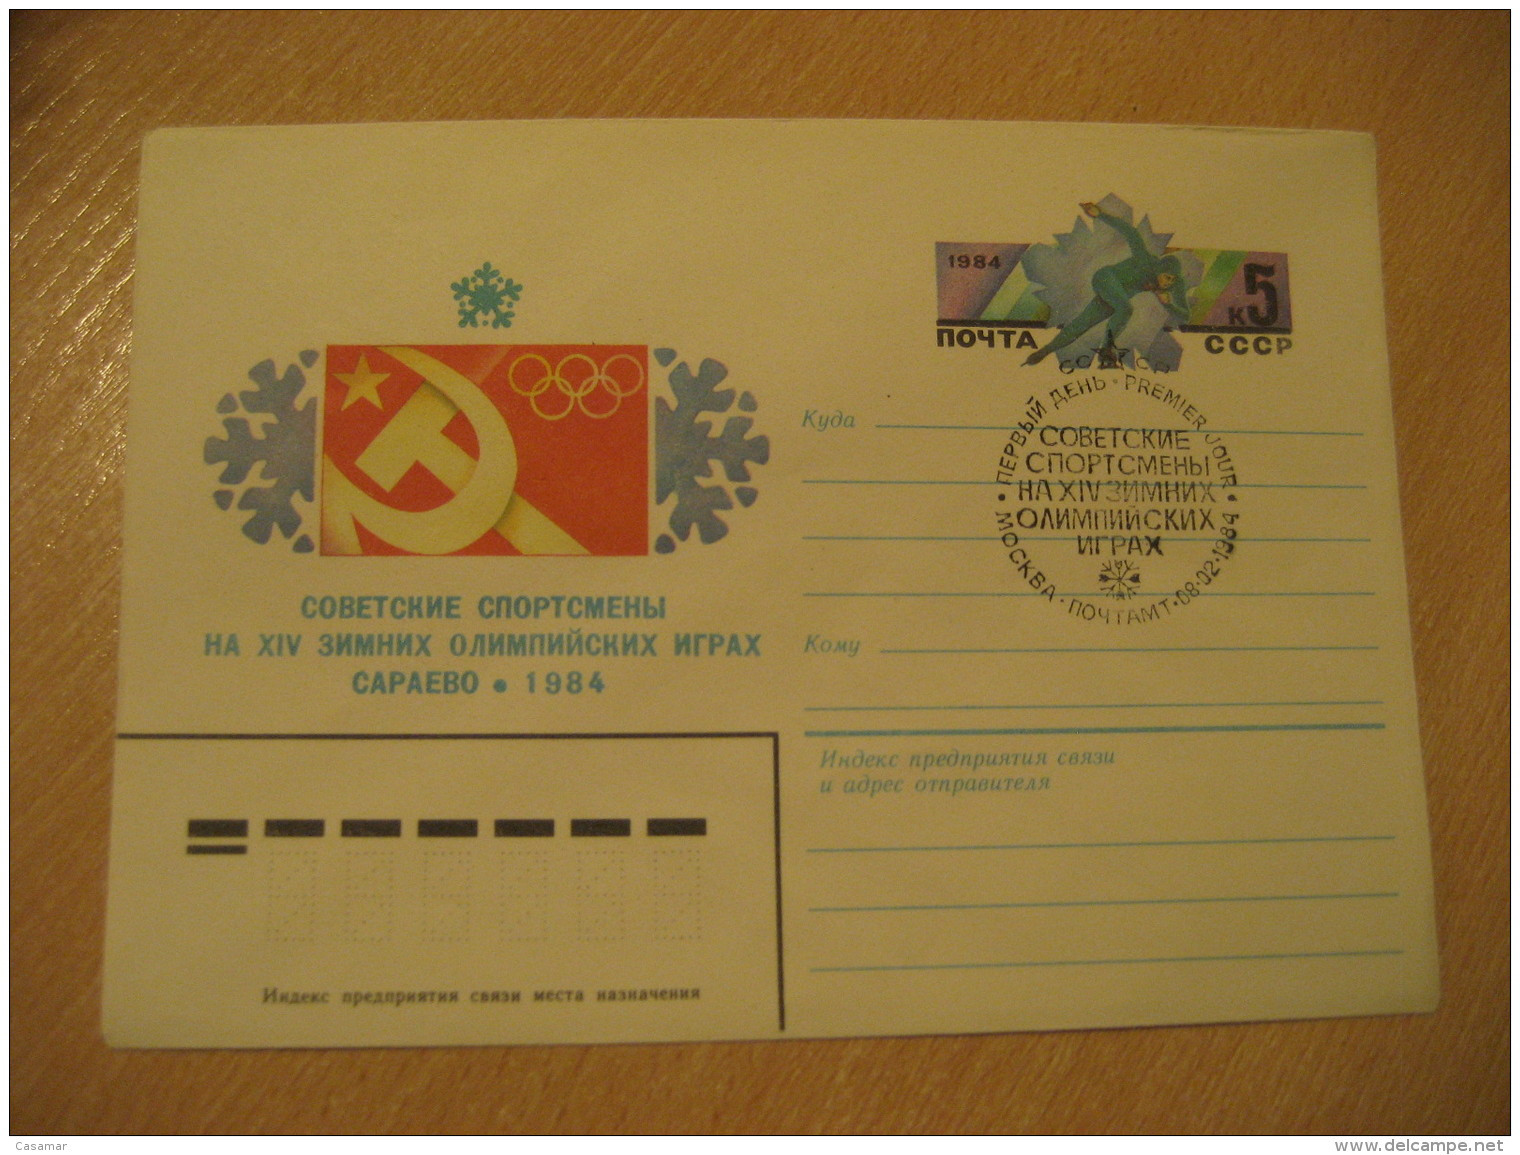 RUSSIA 1984 Olympic Games Olympics Speed Skating On Ice Patinage De Vitesse Sur Glace Postal Stationery Cover USSR CCCP - Eiskunstlauf